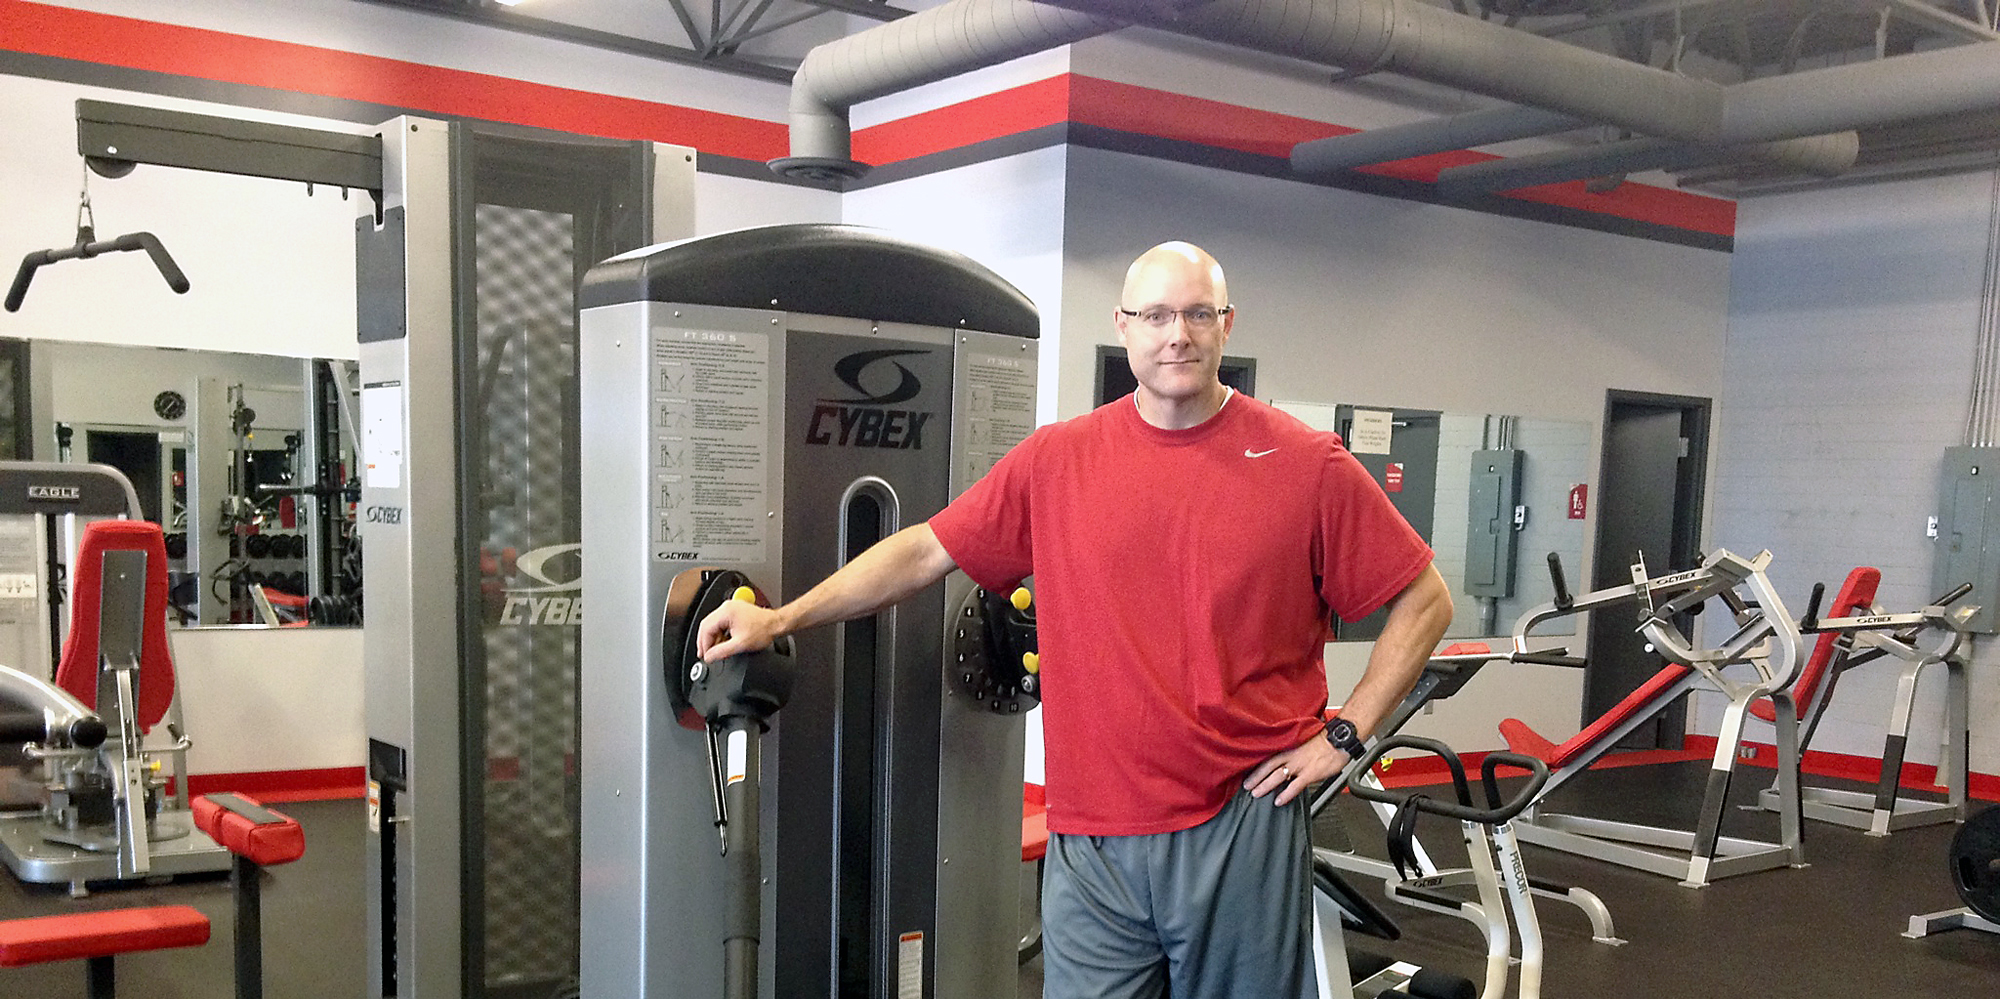 Westfield resident and personal trainer Doug Biggs opened Snap Fitness to offer 24/7 access to members to workout whenever their schedules allow. (Photo by Brianna Susnak)